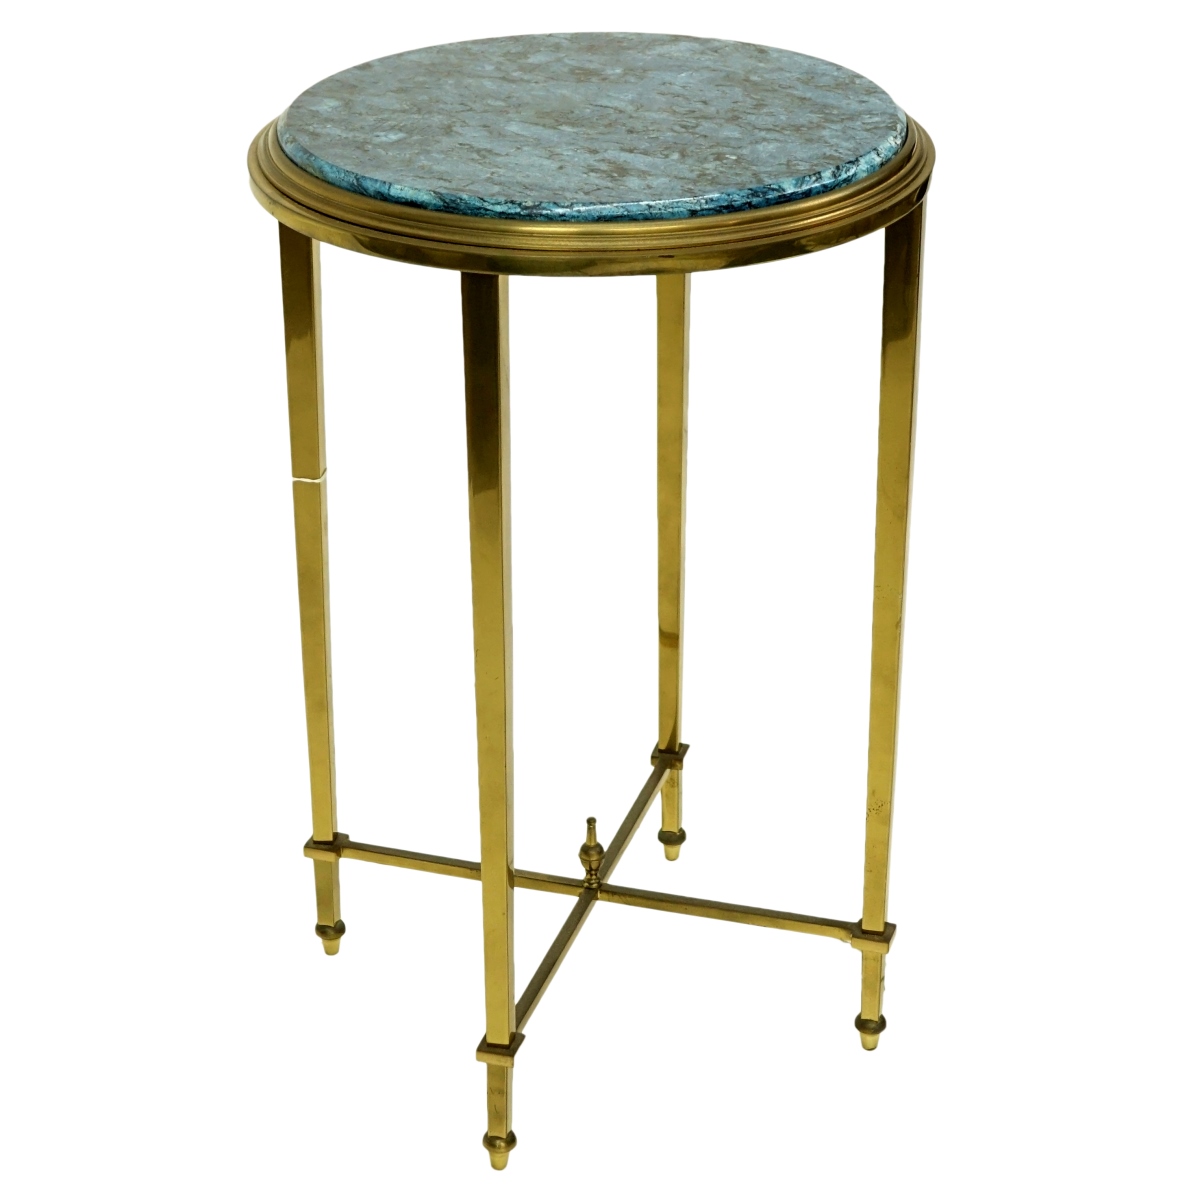 Vintage Brass and Granite Side Table